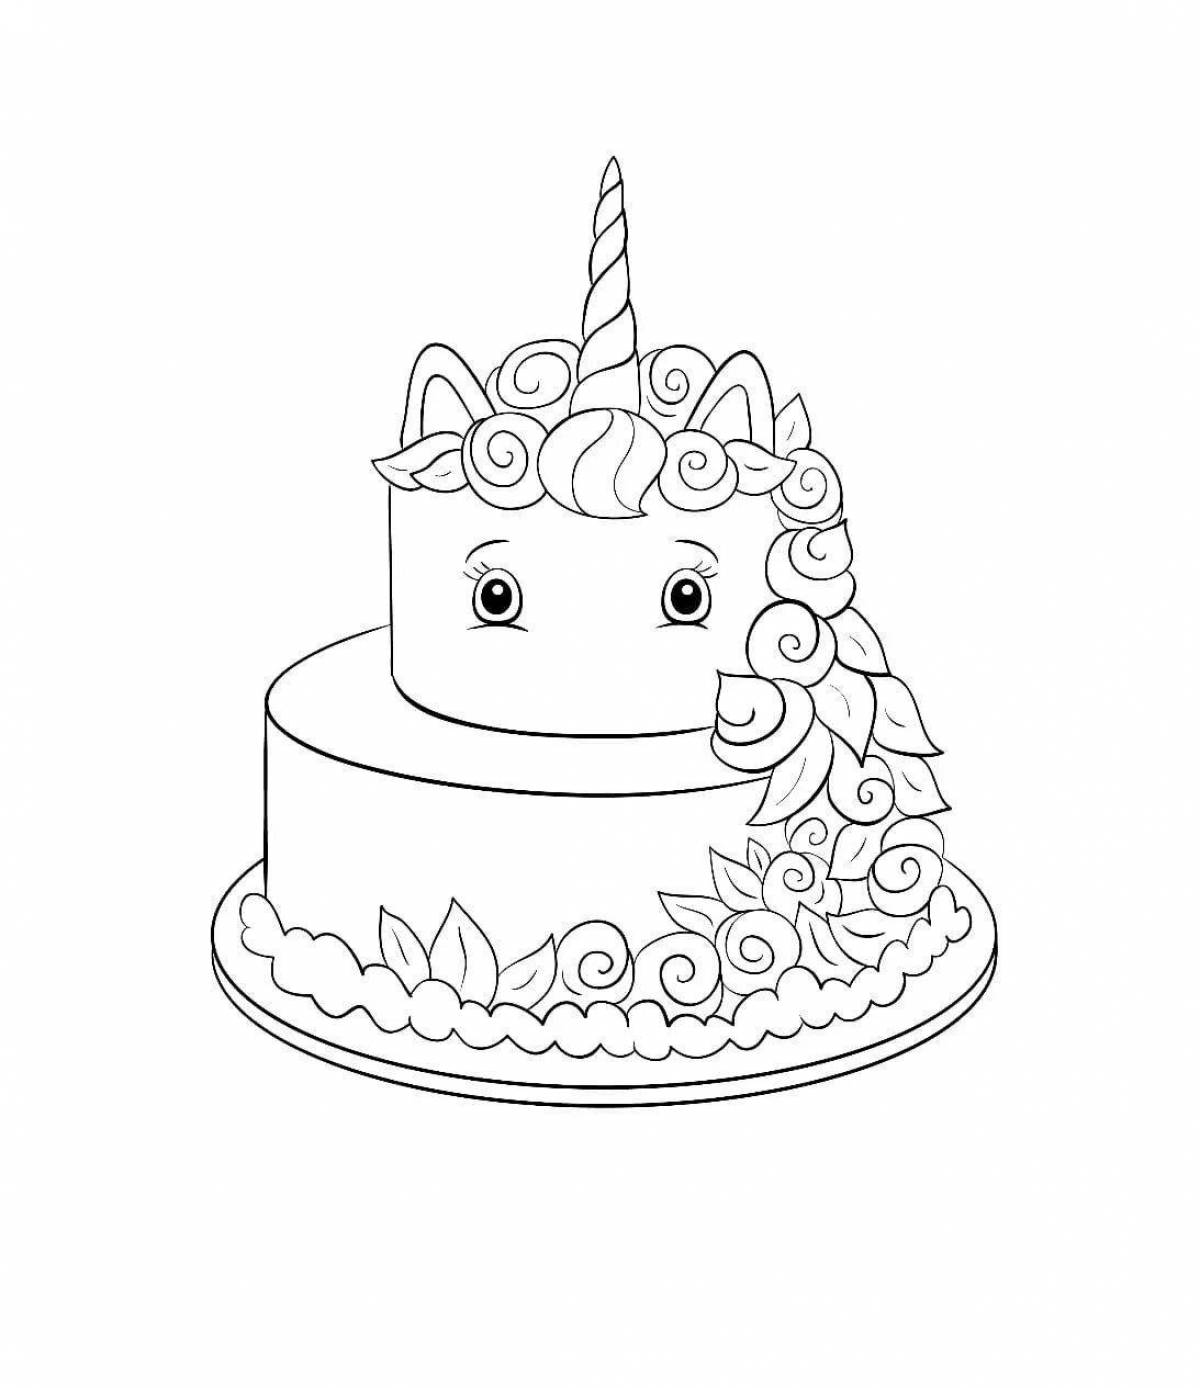 Animated 10th birthday coloring book